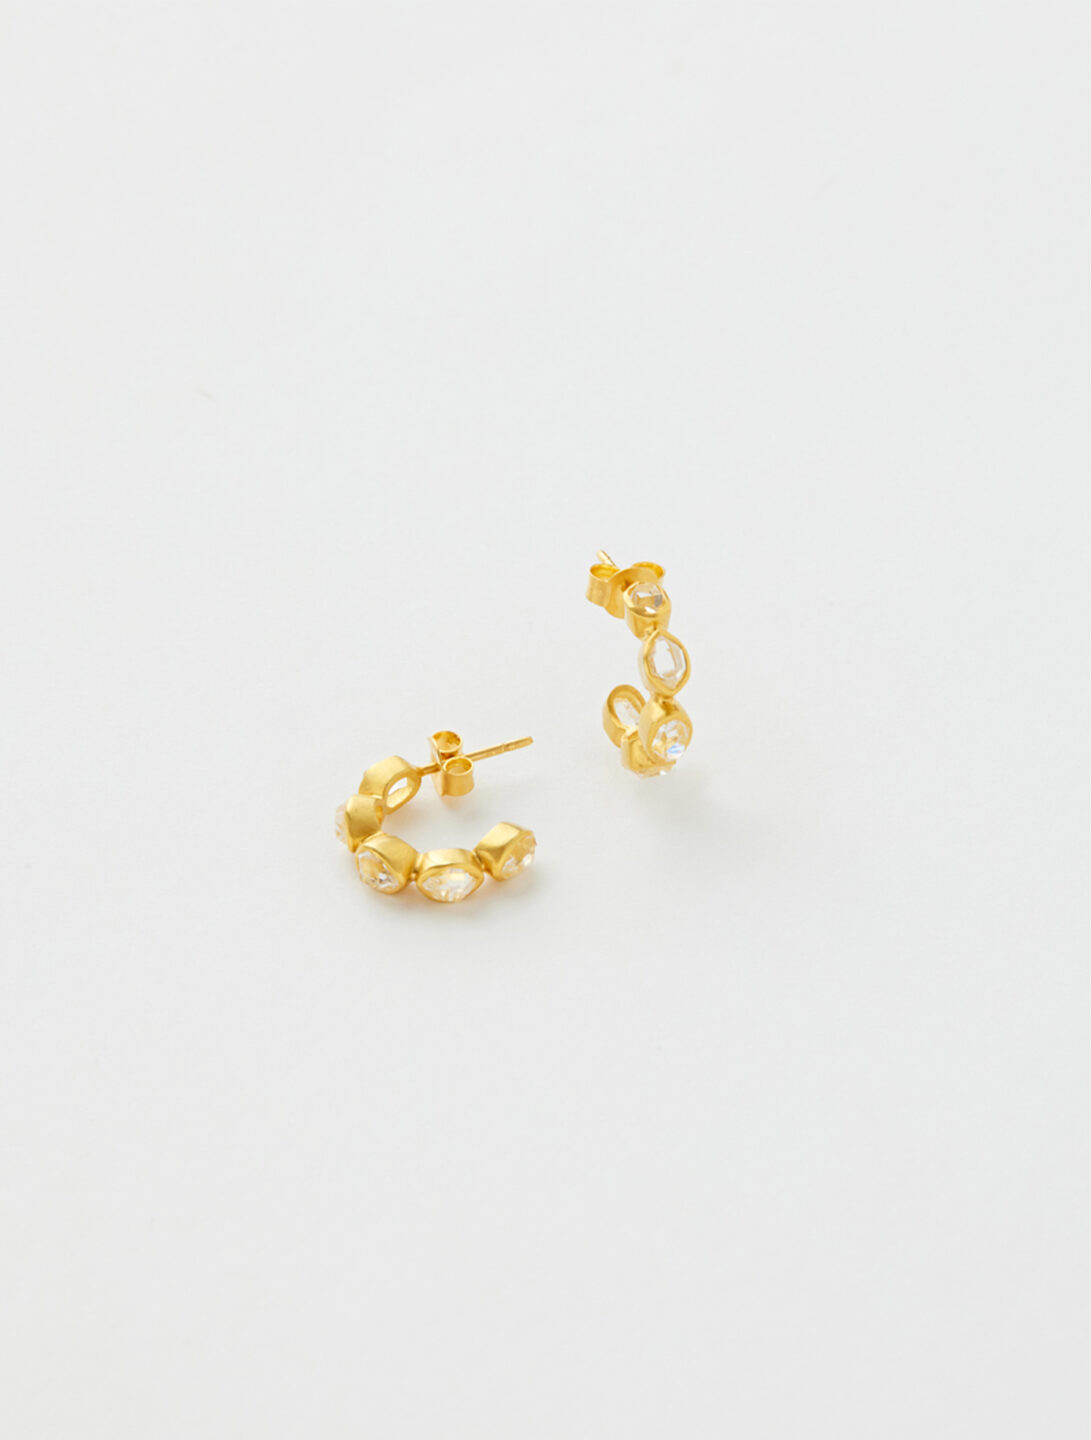 Pippa-Small-Jewellery-New-Herkimer-Small-Earrings-product-image